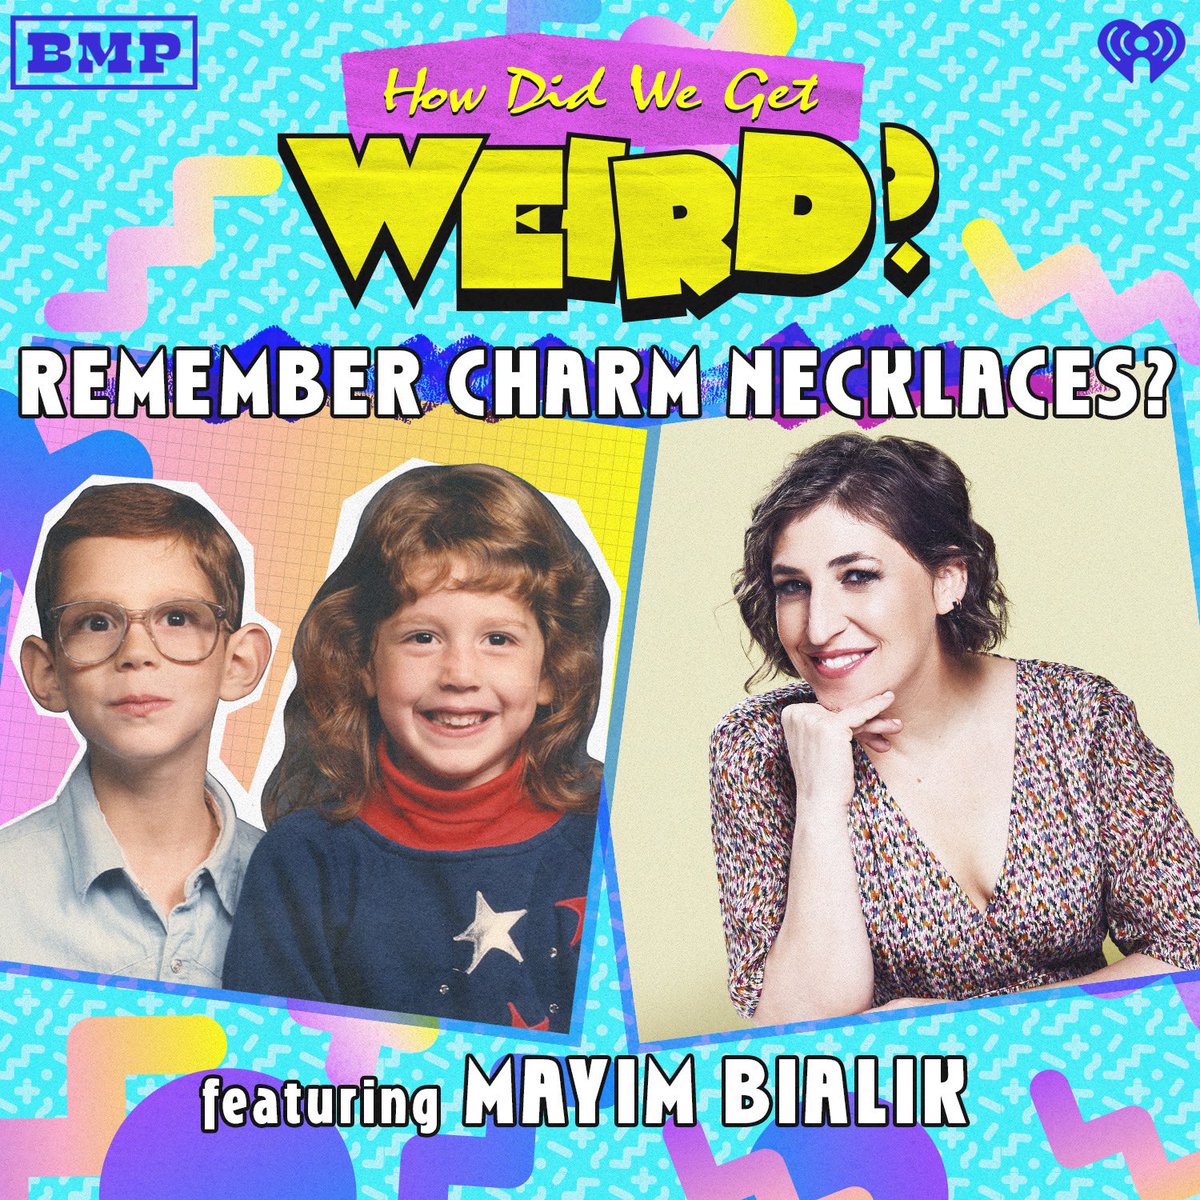 Ok @jonahmbayer and I are SO excited to have @missmayim on the pod today! We’re talking nostalgic fashion from charm necklaces to button covers to wearing multiple socks at once! Plus, will I play it cool re: my love of Blossom? No! And check us out on #bialikbreakdown tomorrow!